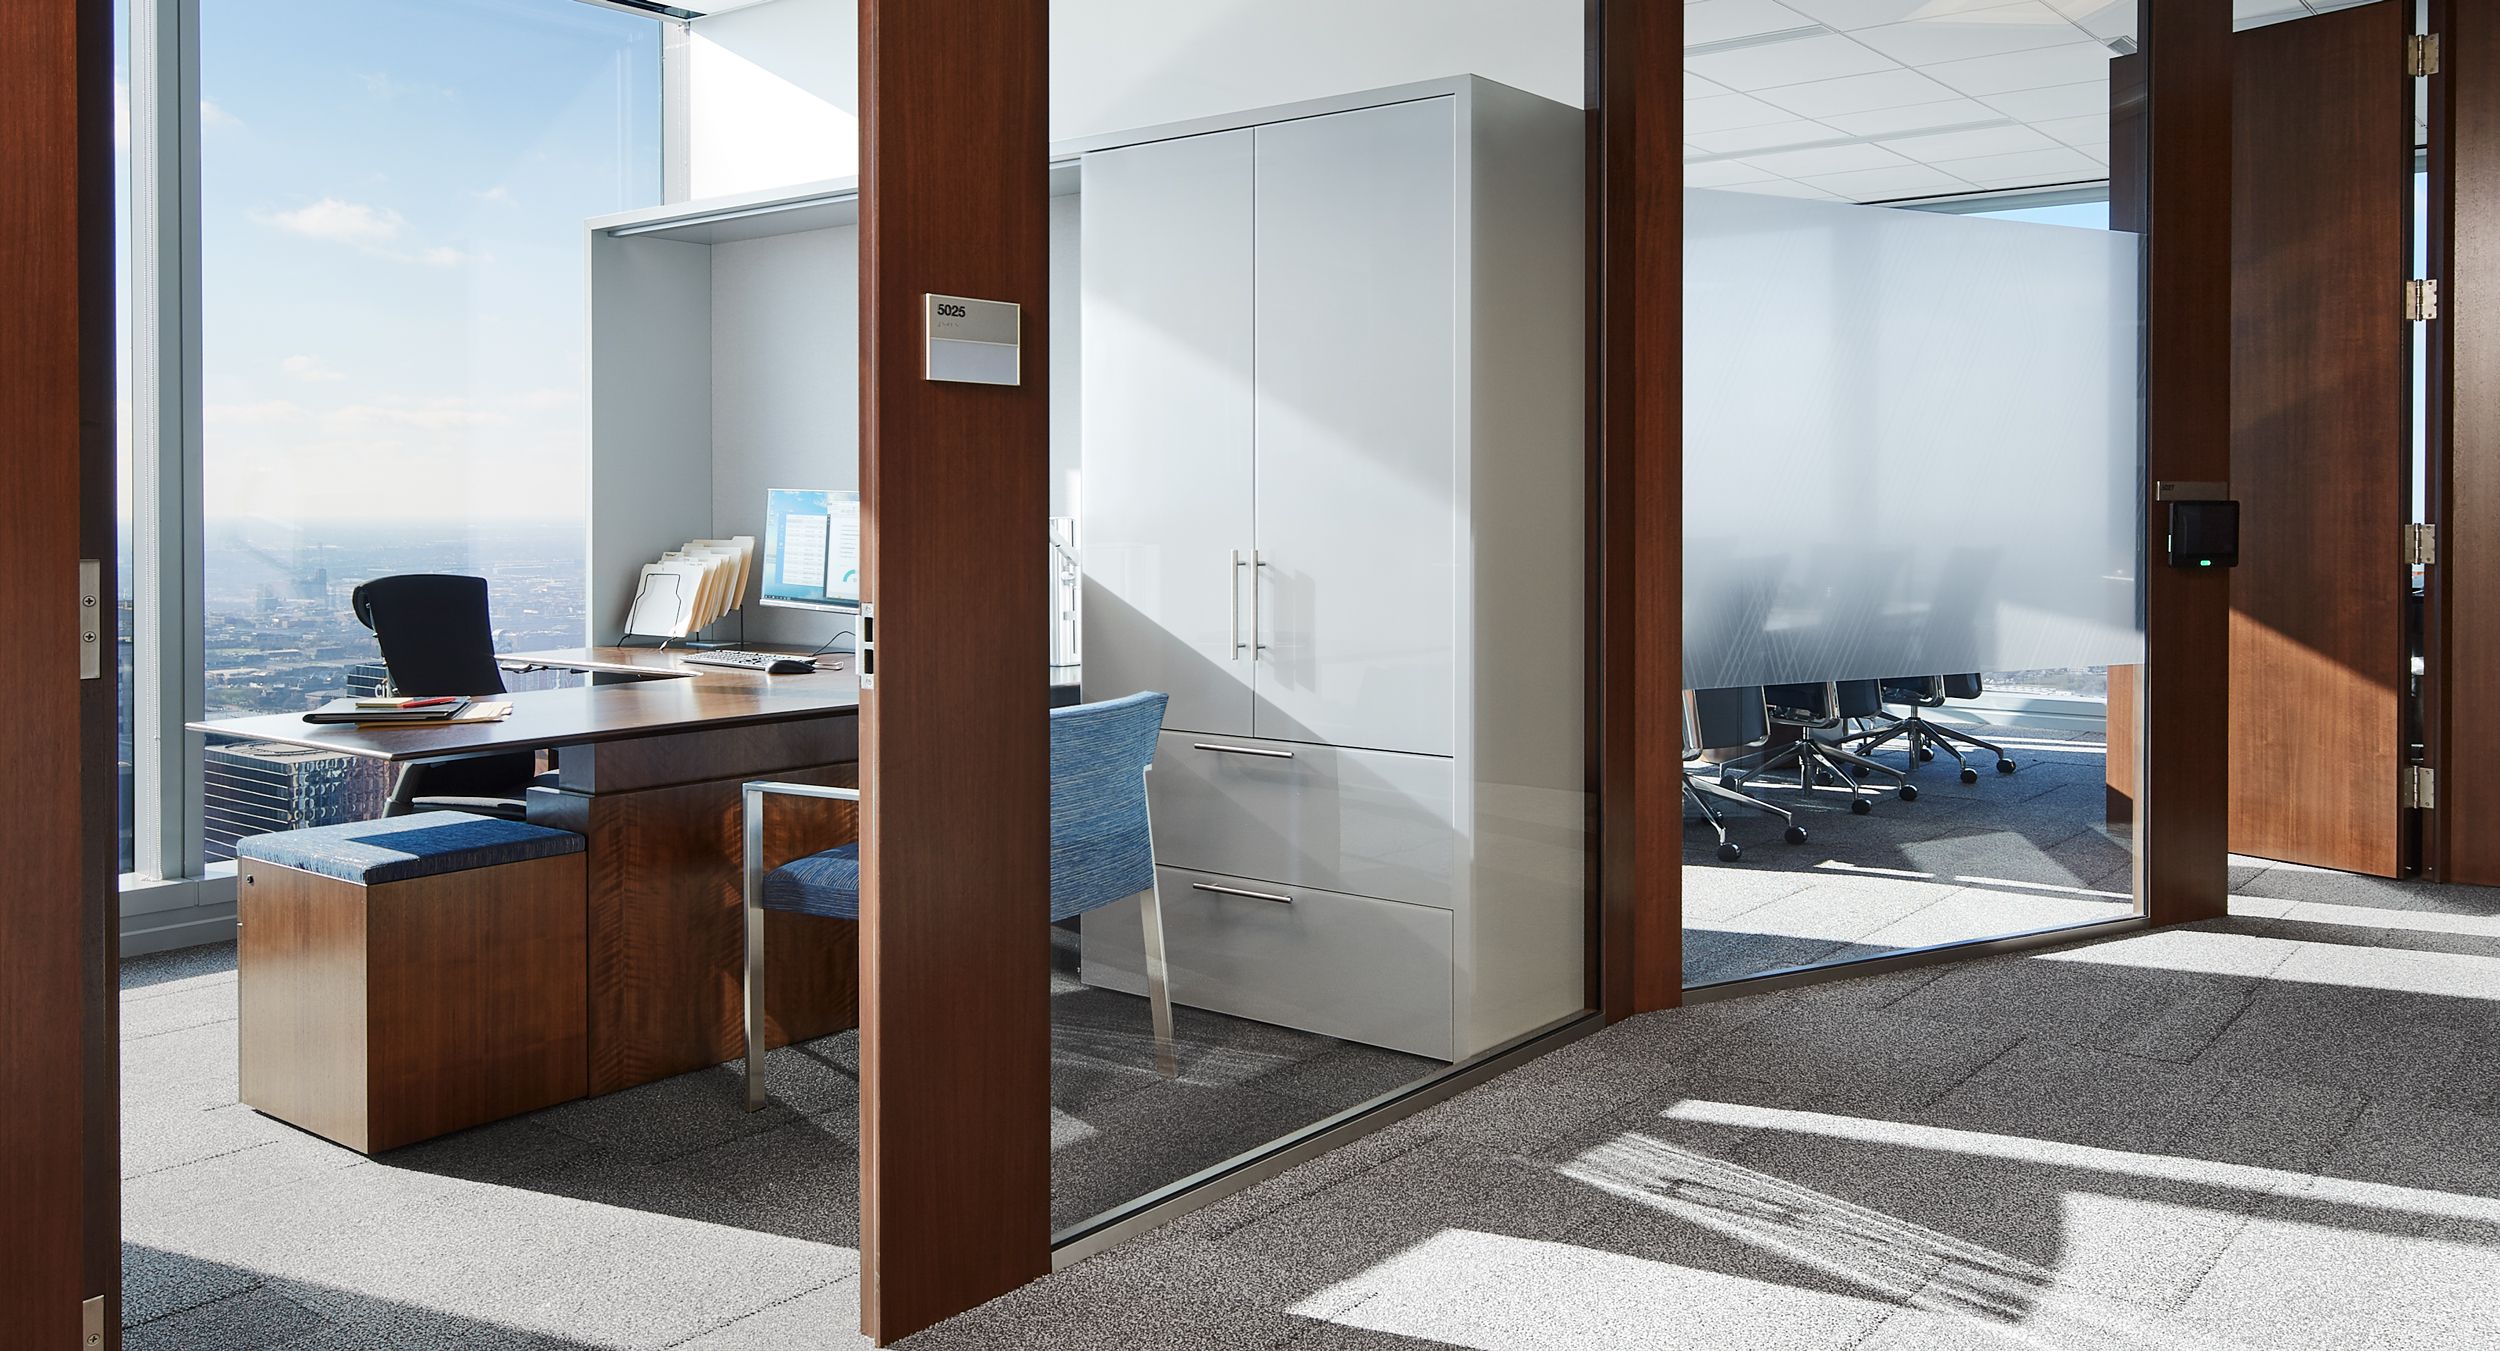 Custom private offices are perfectly tailored to meet the exacting needs of our client.